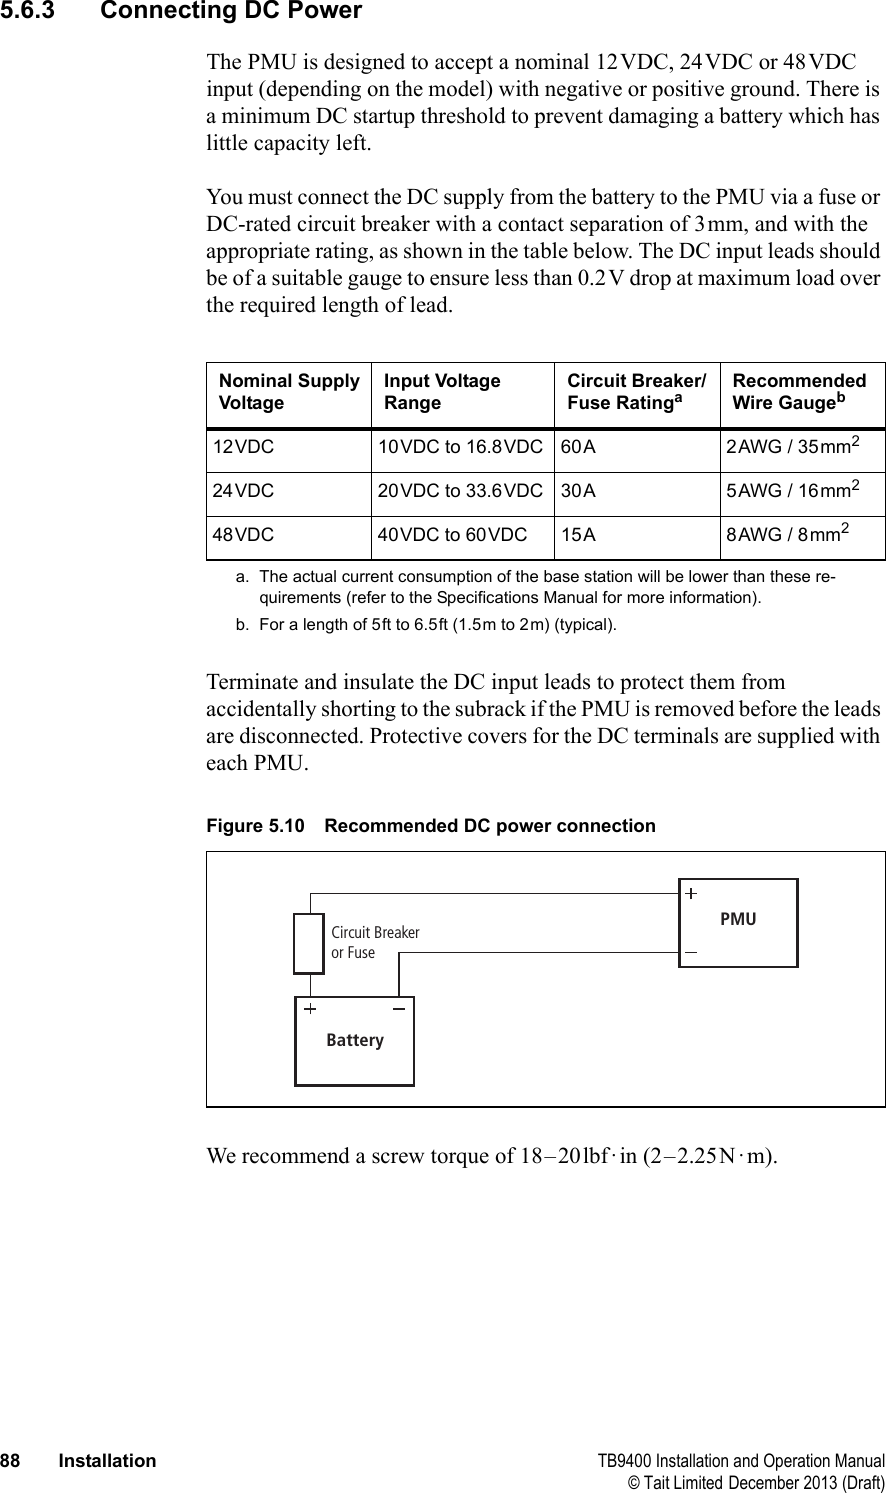  88 Installation TB9400 Installation and Operation Manual© Tait Limited December 2013 (Draft)5.6.3 Connecting DC PowerThe PMU is designed to accept a nominal 12VDC, 24VDC or 48VDC input (depending on the model) with negative or positive ground. There is a minimum DC startup threshold to prevent damaging a battery which has little capacity left.You must connect the DC supply from the battery to the PMU via a fuse or DC-rated circuit breaker with a contact separation of 3mm, and with the appropriate rating, as shown in the table below. The DC input leads should be of a suitable gauge to ensure less than 0.2V drop at maximum load over the required length of lead.Terminate and insulate the DC input leads to protect them from accidentally shorting to the subrack if the PMU is removed before the leads are disconnected. Protective covers for the DC terminals are supplied with each PMU.We recommend a screw torque of 18–20lbf·in (2–2.25N·m). Nominal Supply VoltageInput Voltage RangeCircuit Breaker/Fuse Ratingaa. The actual current consumption of the base station will be lower than these re-quirements (refer to the Specifications Manual for more information).Recommended Wire Gaugebb. For a length of 5ft to 6.5ft (1.5m to 2m) (typical).12VDC 10VDC to 16.8VDC 60A 2AWG / 35mm224VDC 20VDC to 33.6VDC 30A 5AWG / 16mm248VDC 40VDC to 60VDC 15A 8AWG / 8mm2Figure 5.10 Recommended DC power connectionBatteryCircuit Breakeror FusePMU